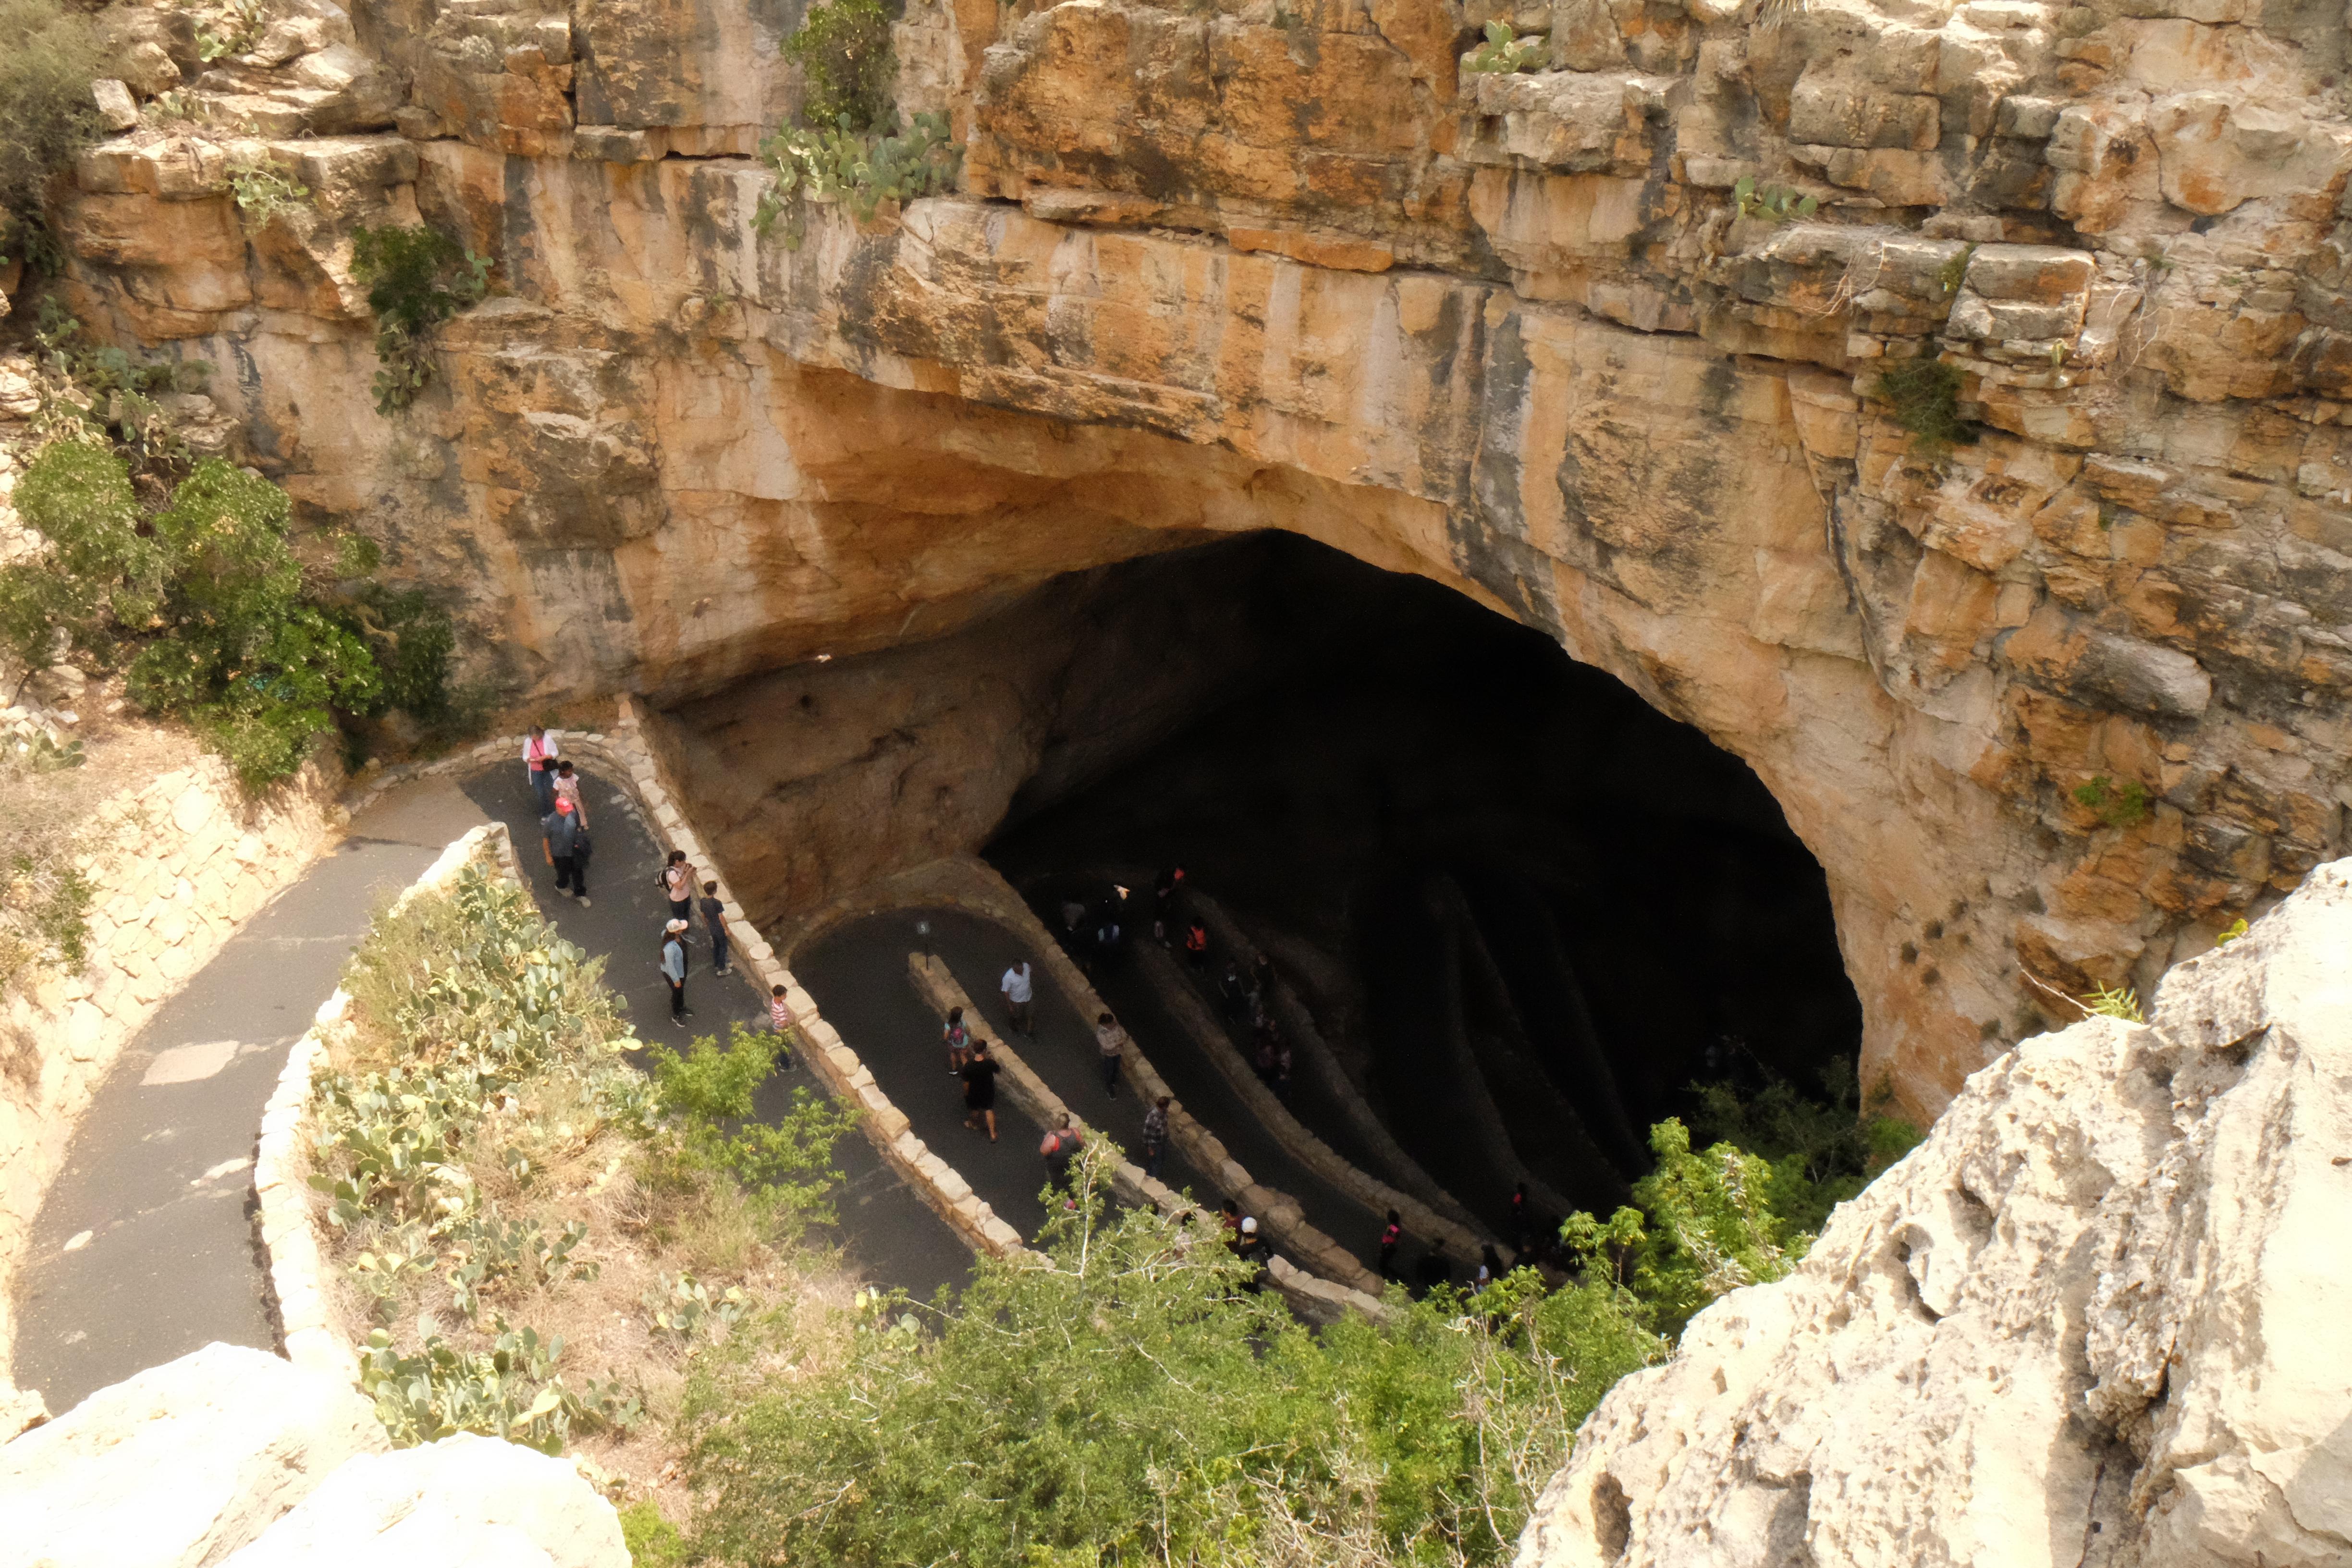 Photo of the Natural Entrance to Carlsbad Cavern with visitors hiking down the trail.